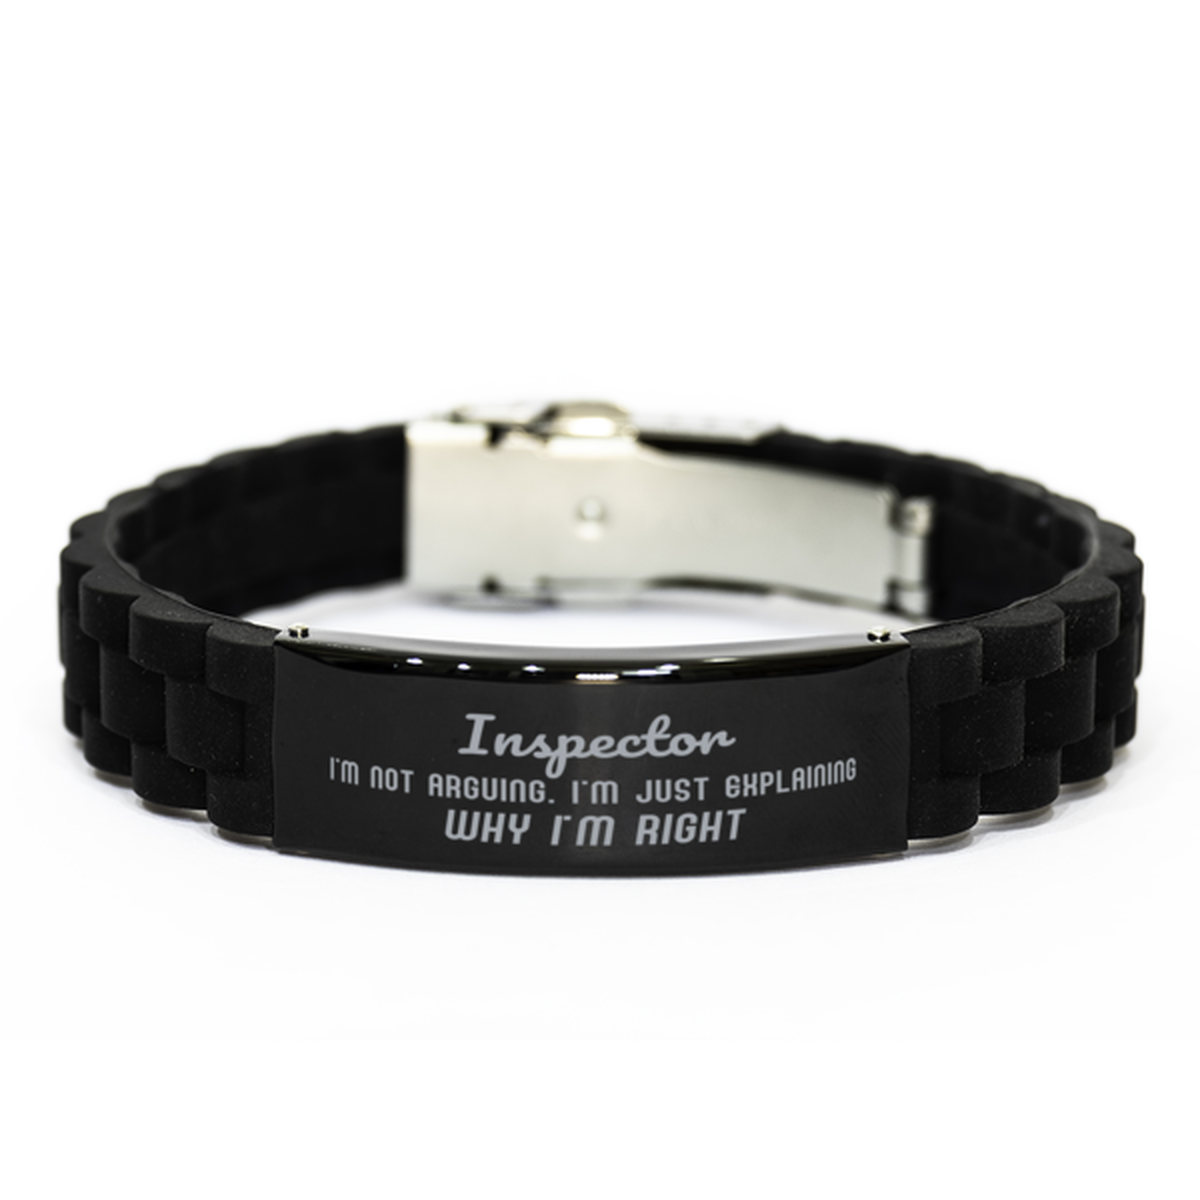 Inspector I'm not Arguing. I'm Just Explaining Why I'm RIGHT Black Glidelock Clasp Bracelet, Funny Saying Quote Inspector Gifts For Inspector Graduation Birthday Christmas Gifts for Men Women Coworker